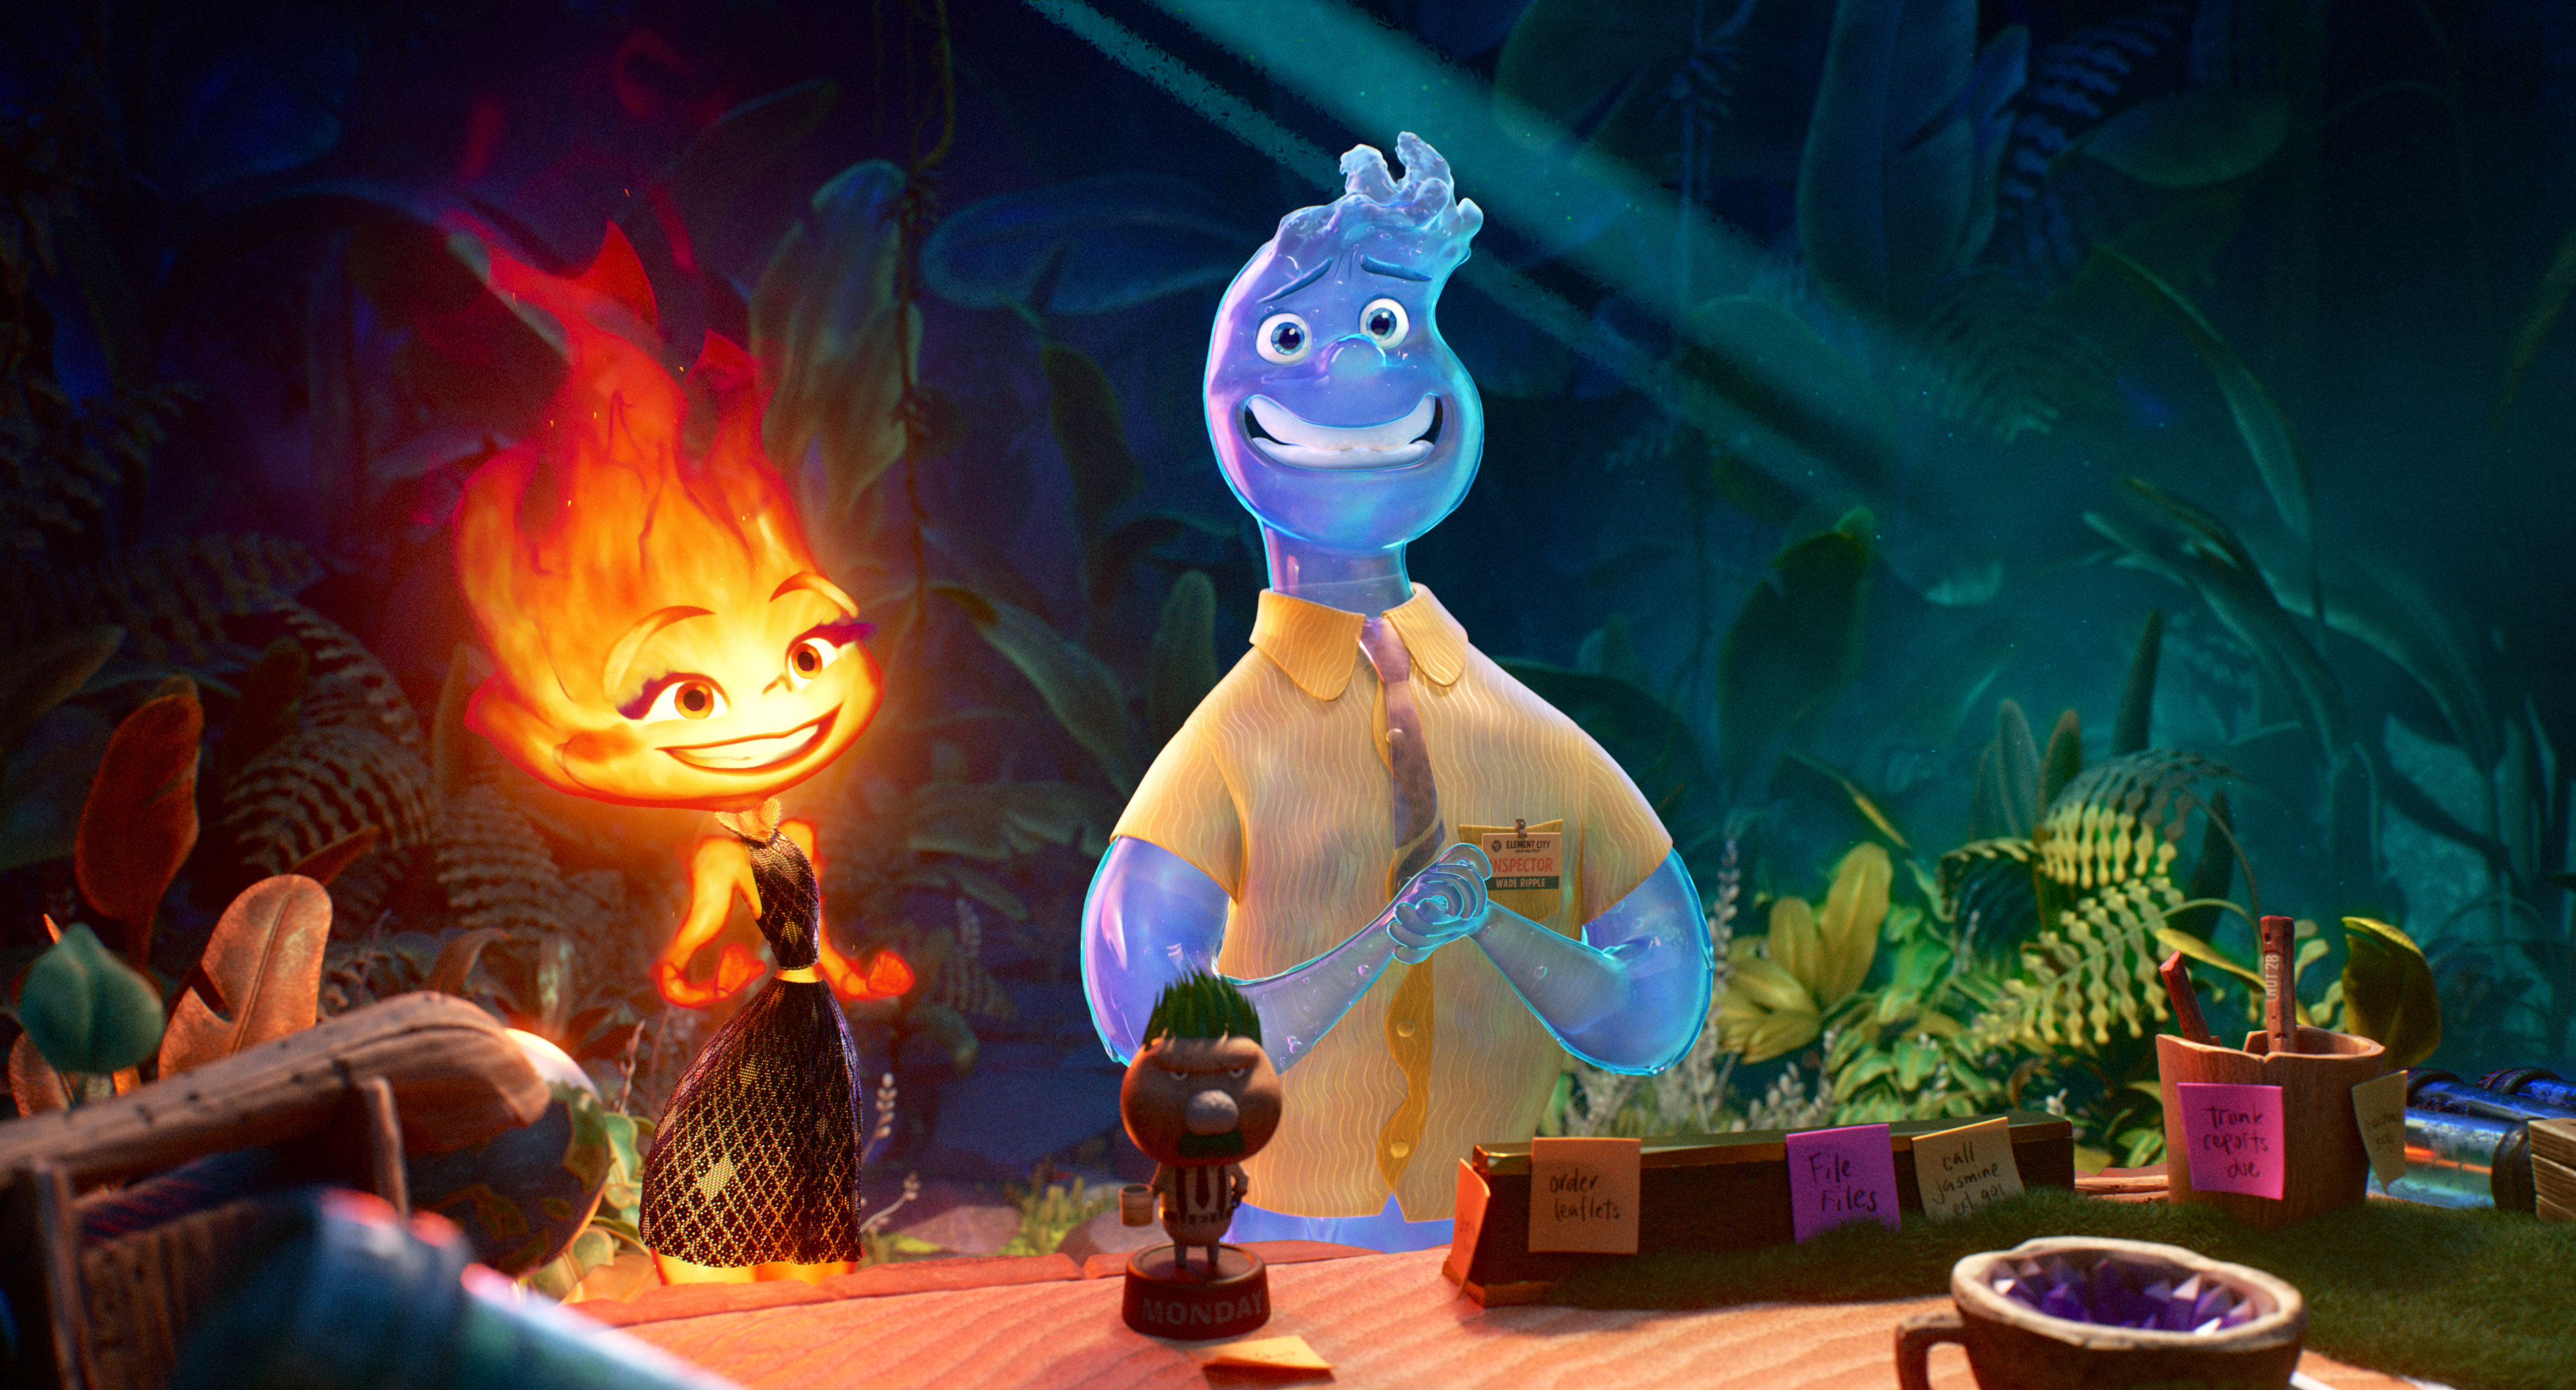 Ember (left, voiced by Leah Lewis) and Wade (Mamoudou Athie) in a still from “Elemental”. Photo: Disney/Pixar.